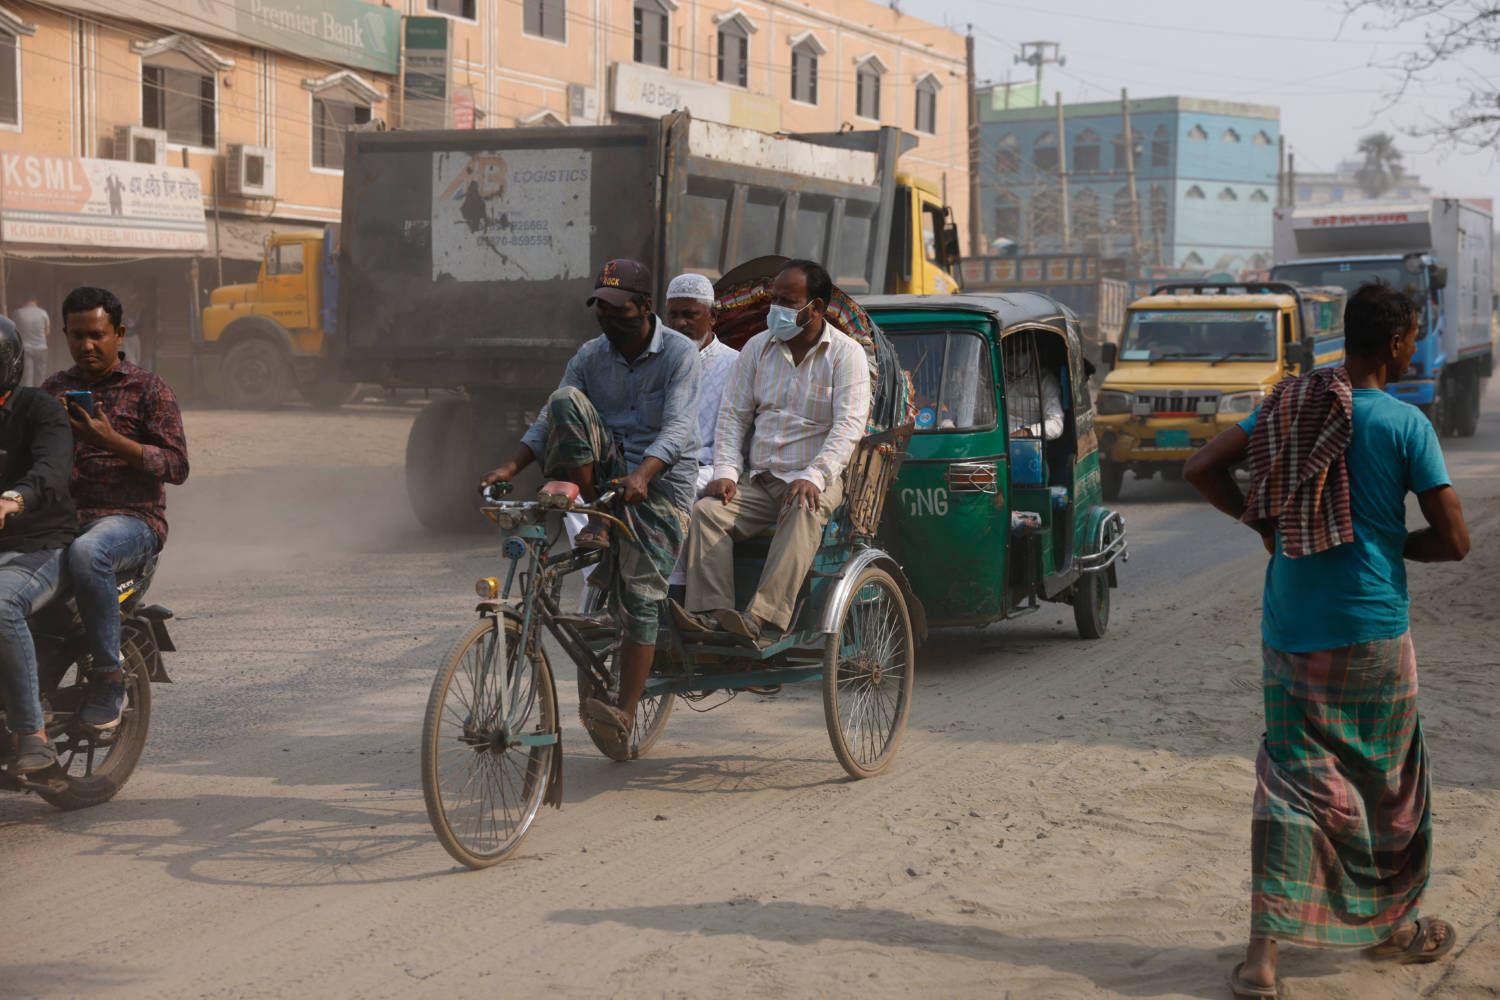 People Wear Masks As They Move Through The Dusty Road As Air Quality Decreases During Dry Season In Dhaka